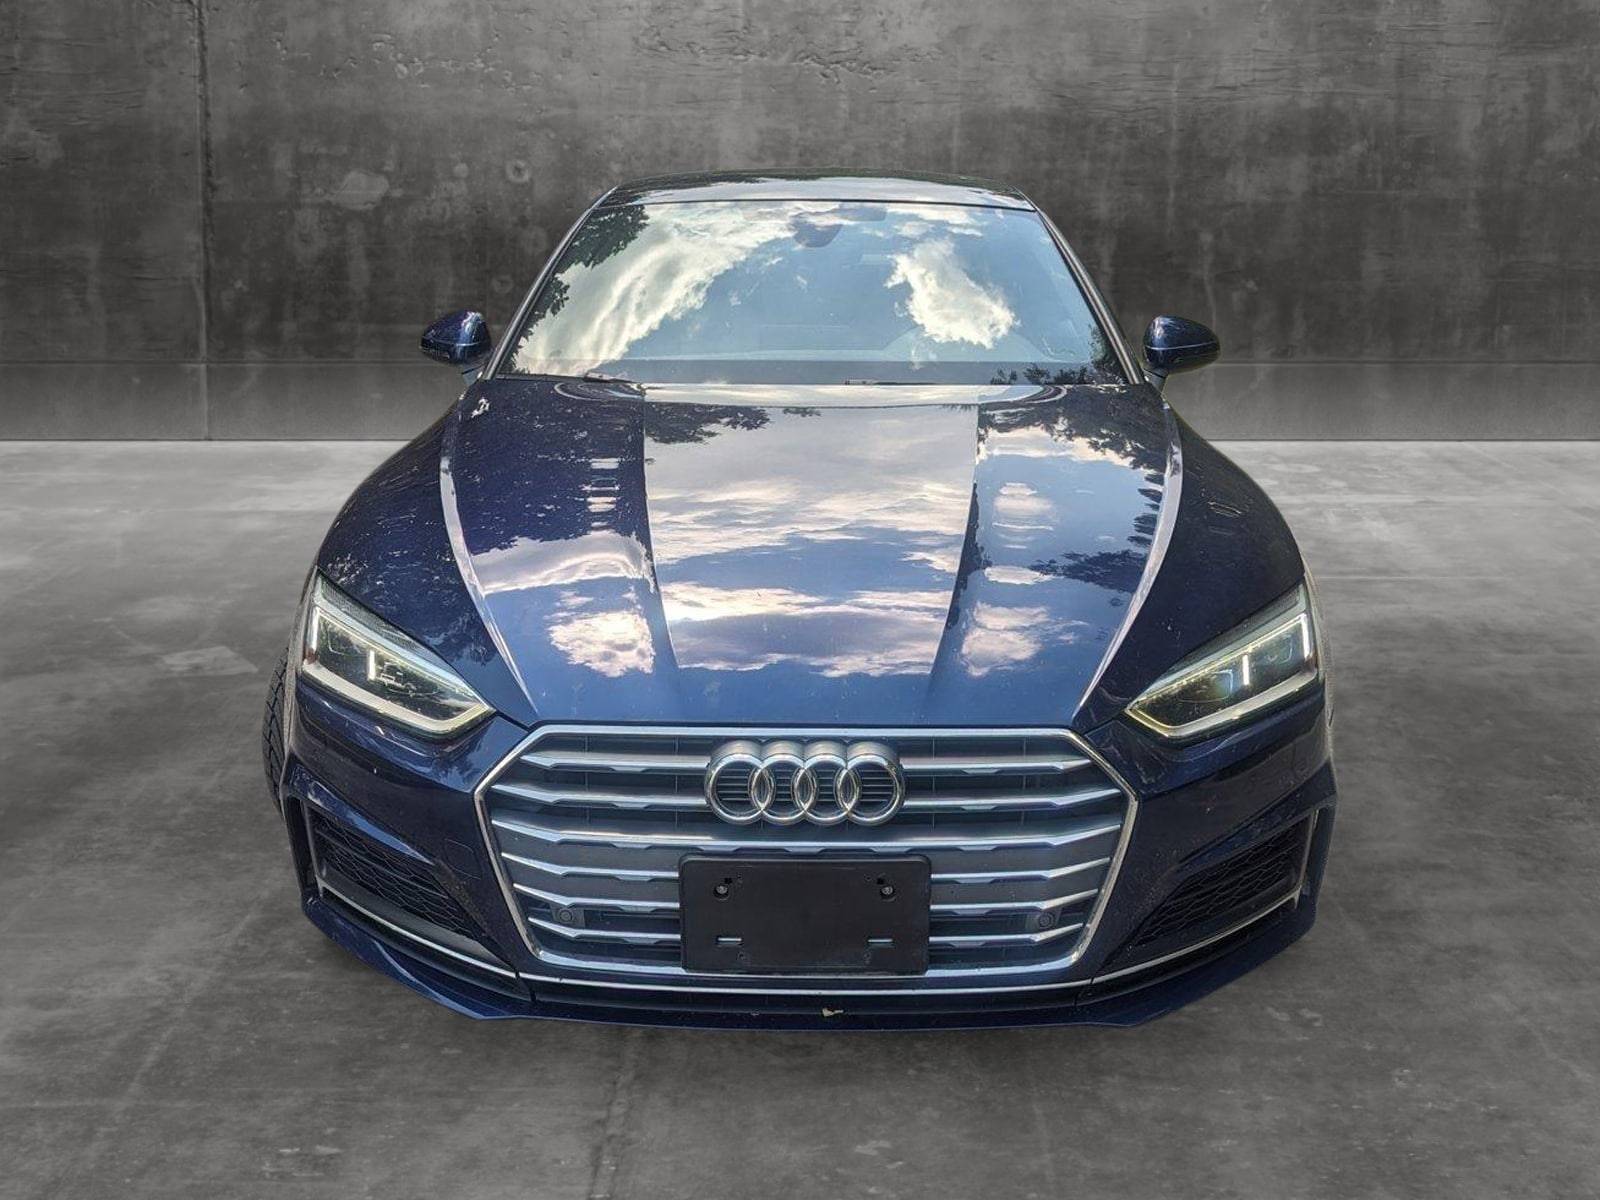 Used 2019 Audi A5 Sportback Premium Plus with VIN WAUENCF5XKA013036 for sale in Columbus, GA